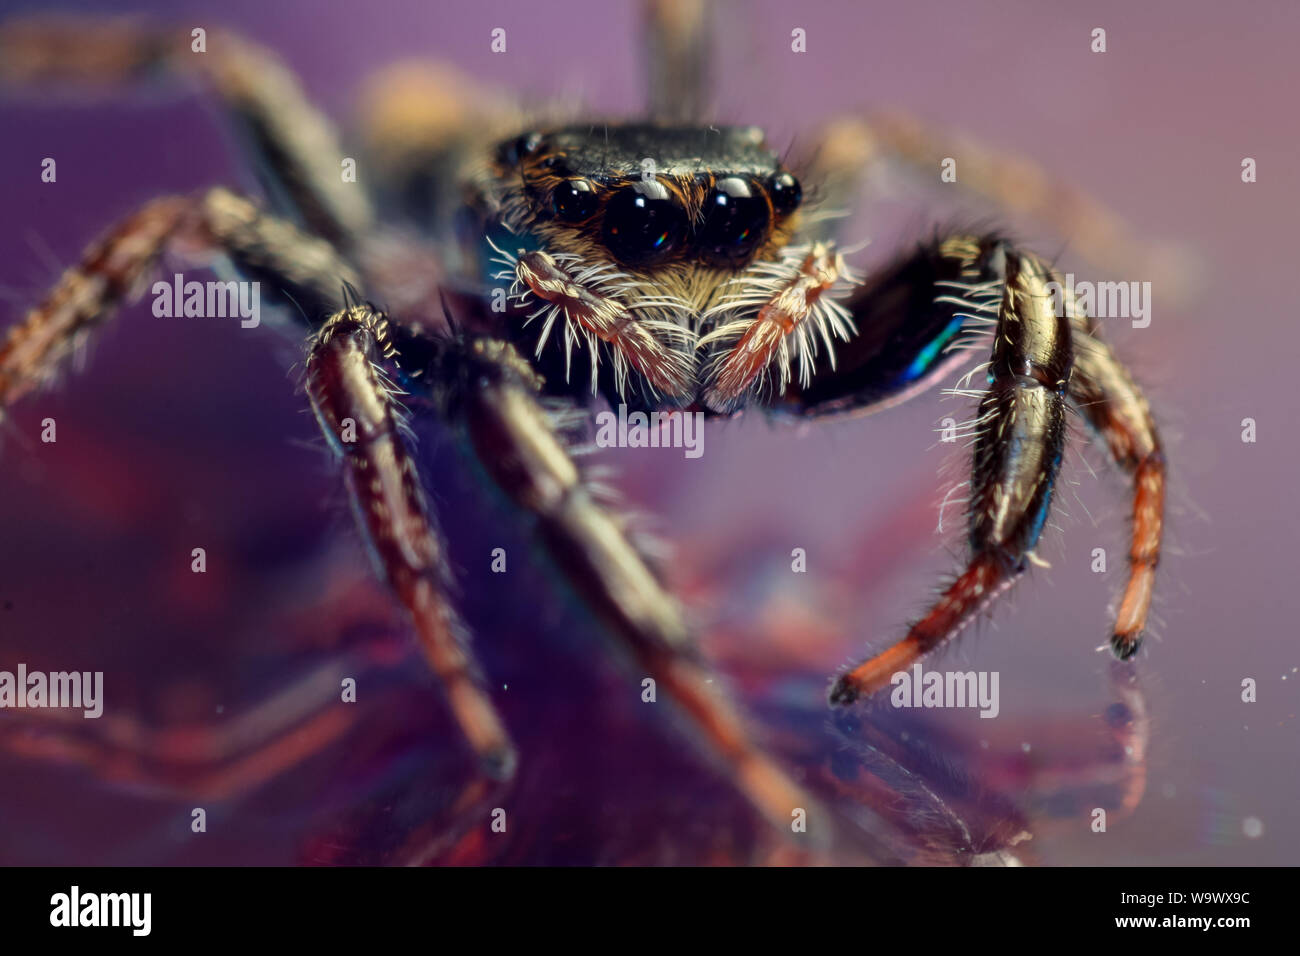 High magnification macro of a cute jumping spider with big eyes over a colorful reflective background, detailed spider close-up on a mirror Stock Photo